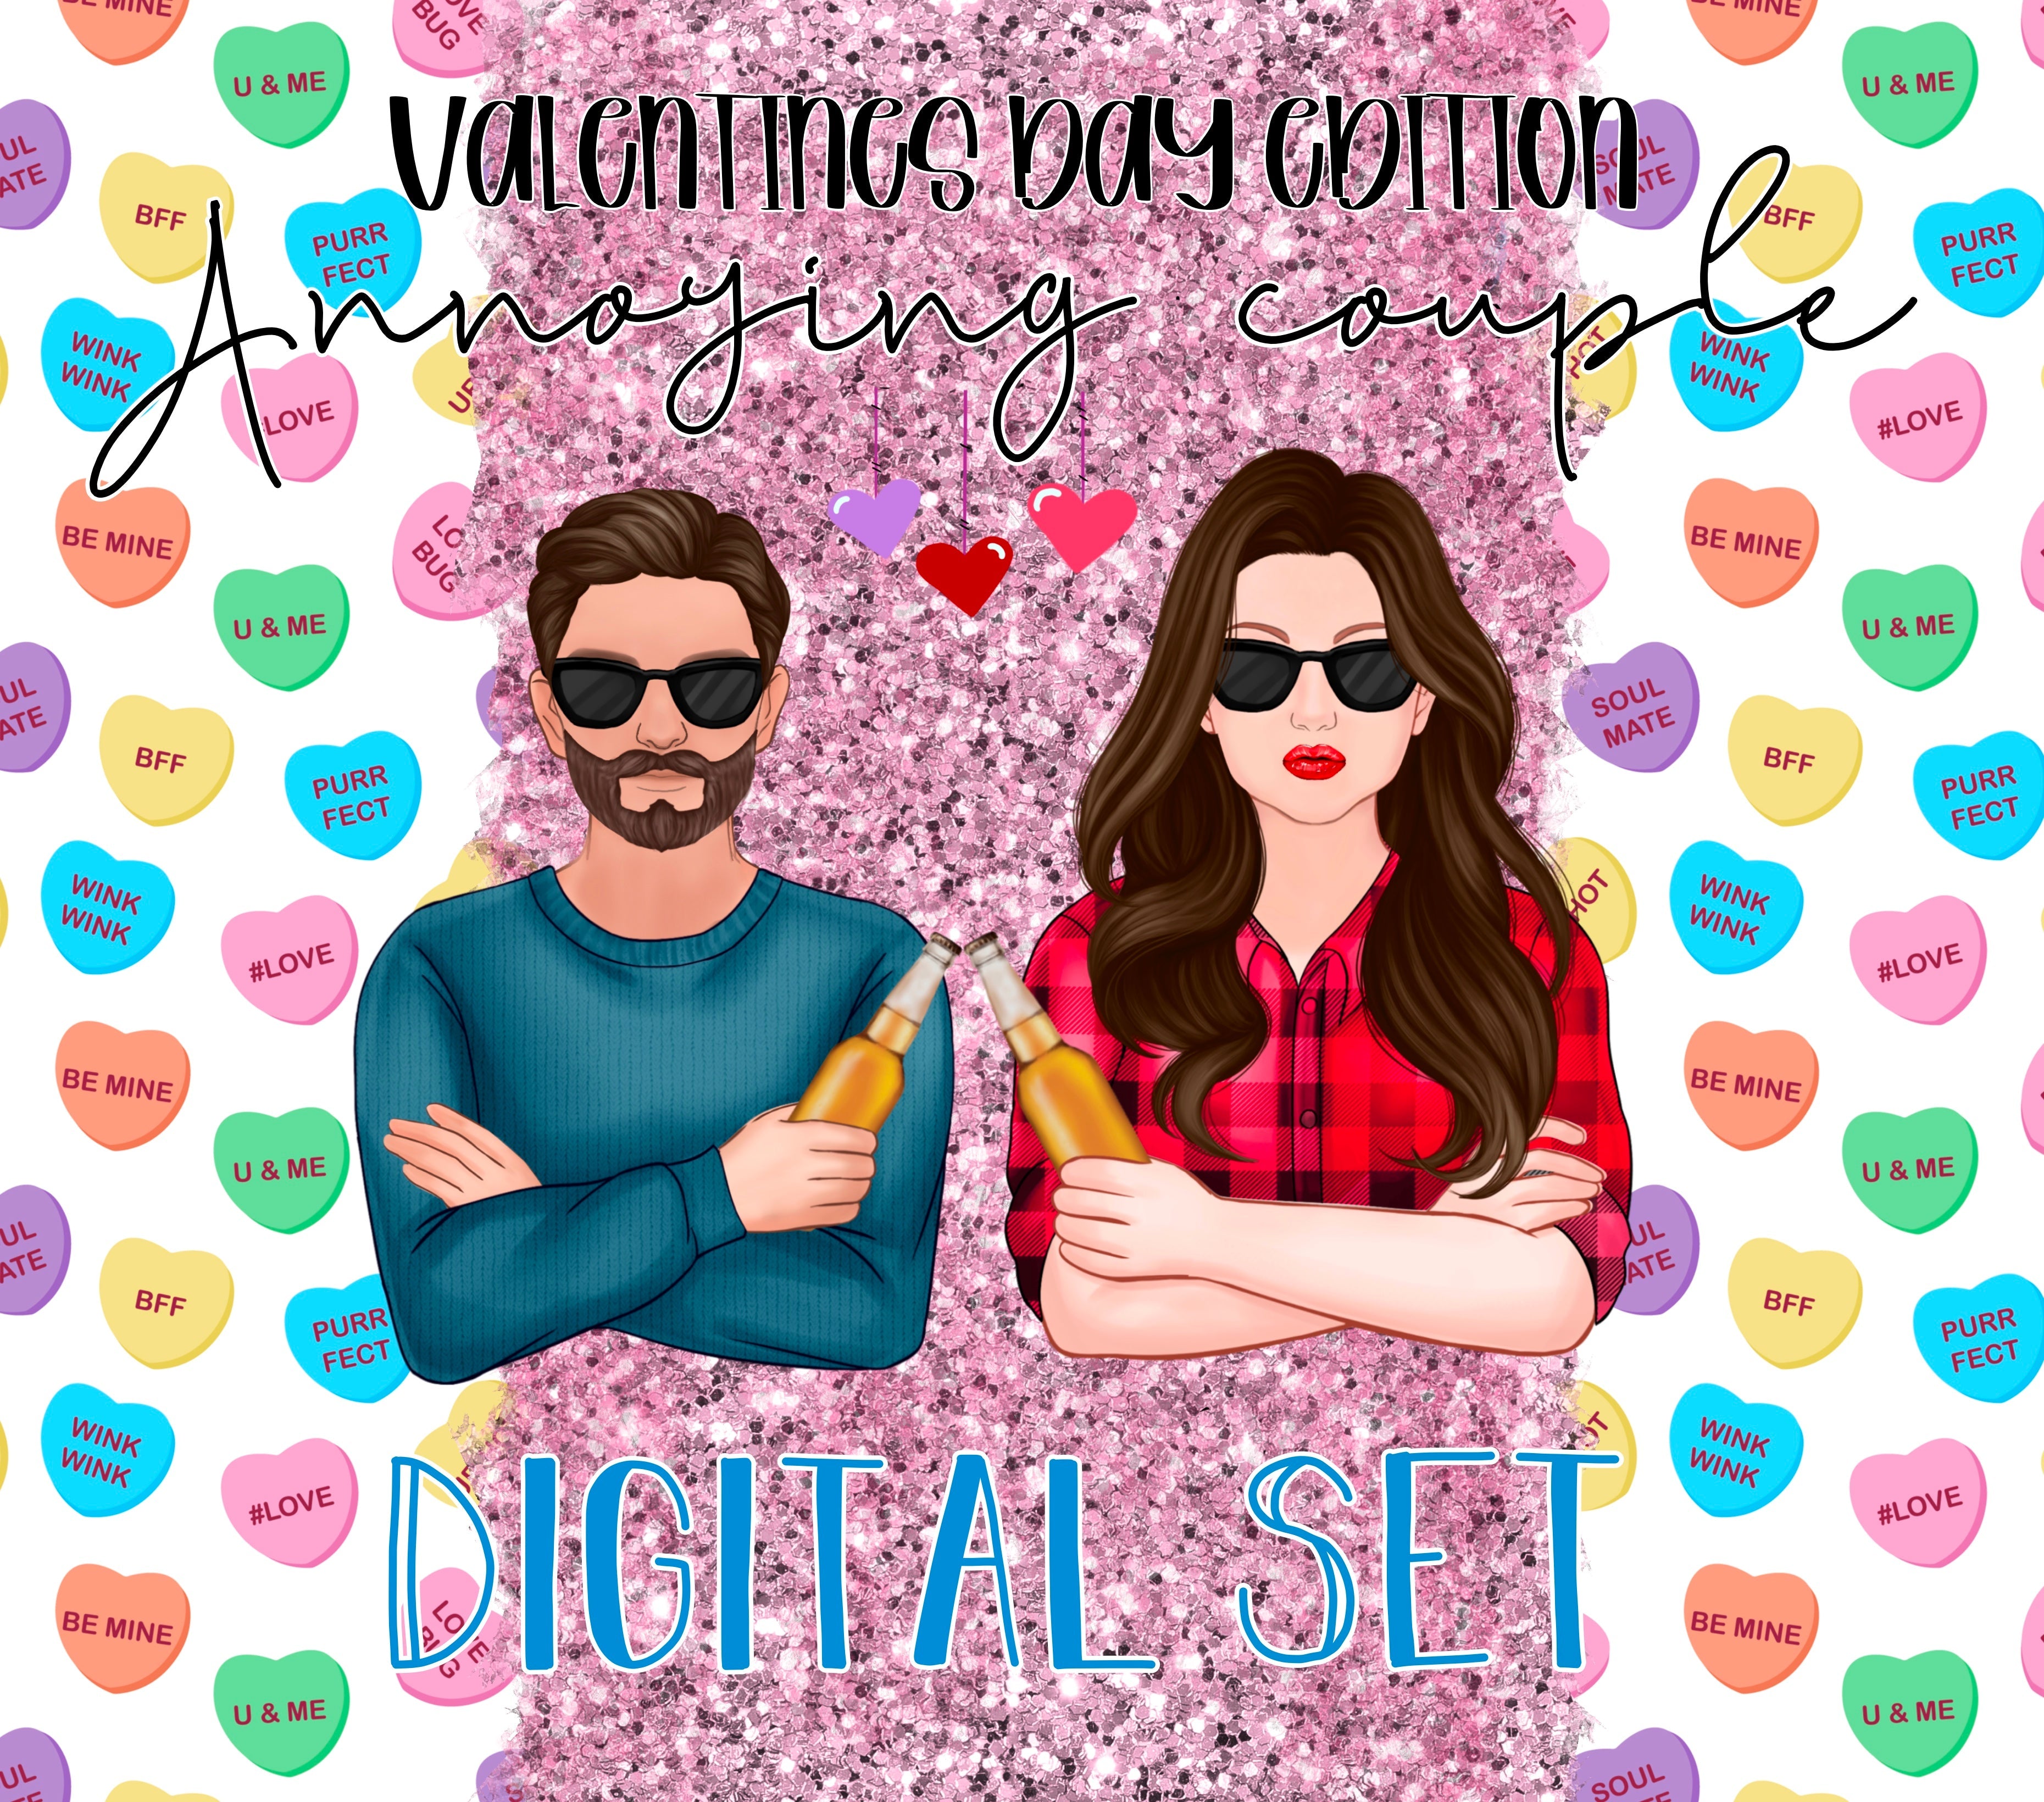 Build your own “Annoying Couple” Valentines Day edition - DTF transfer